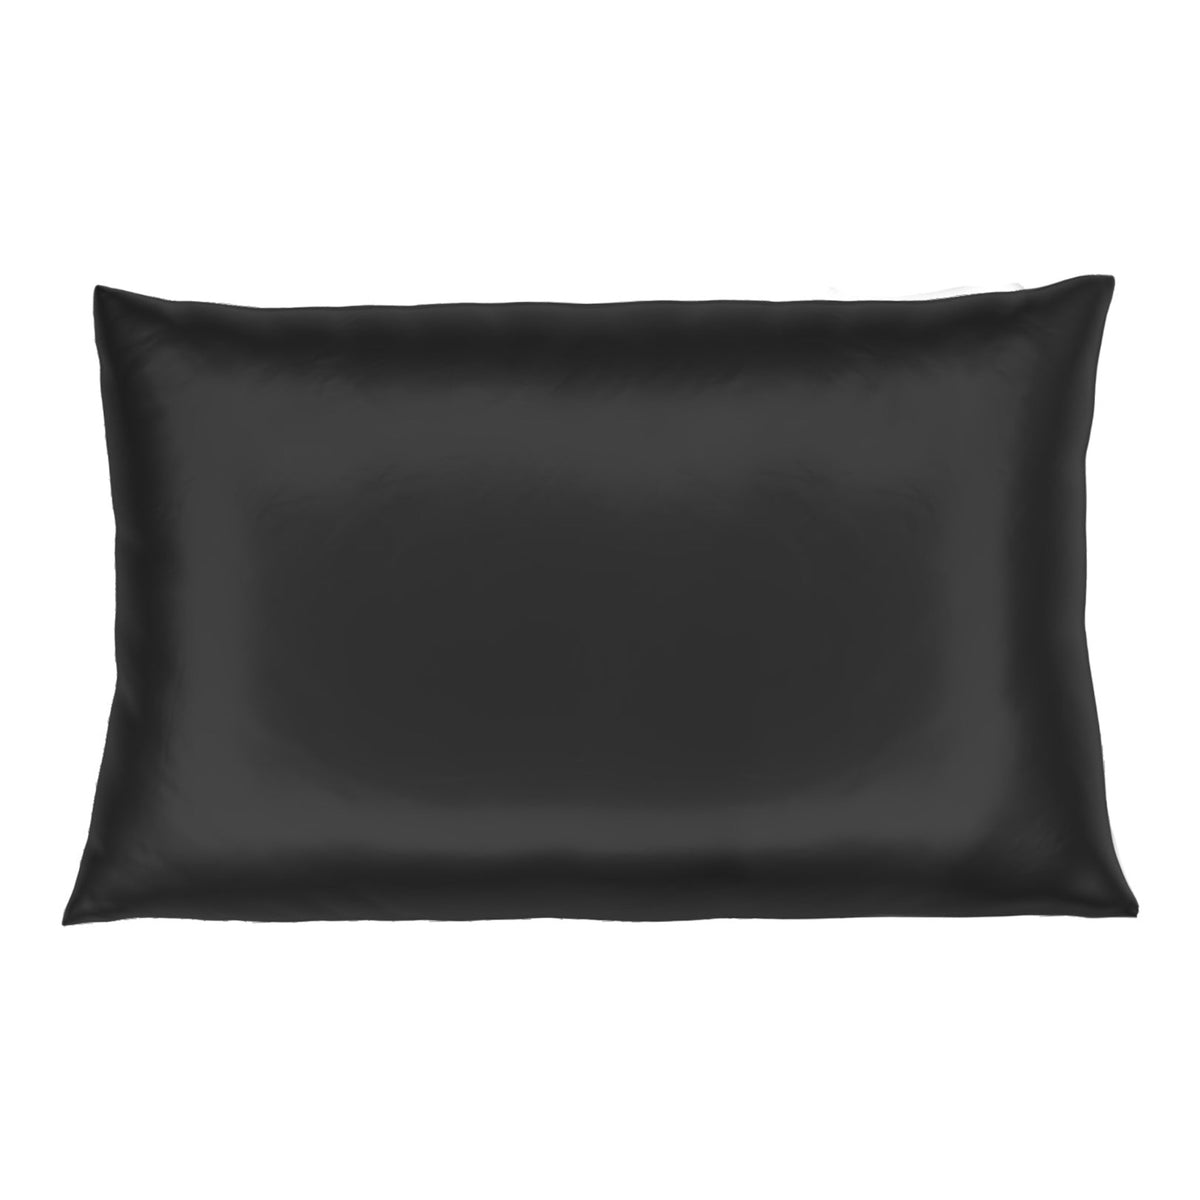 Mulberry Park Silks Deluxe 19 Momme Pure Silk Pillowcase in Black Color